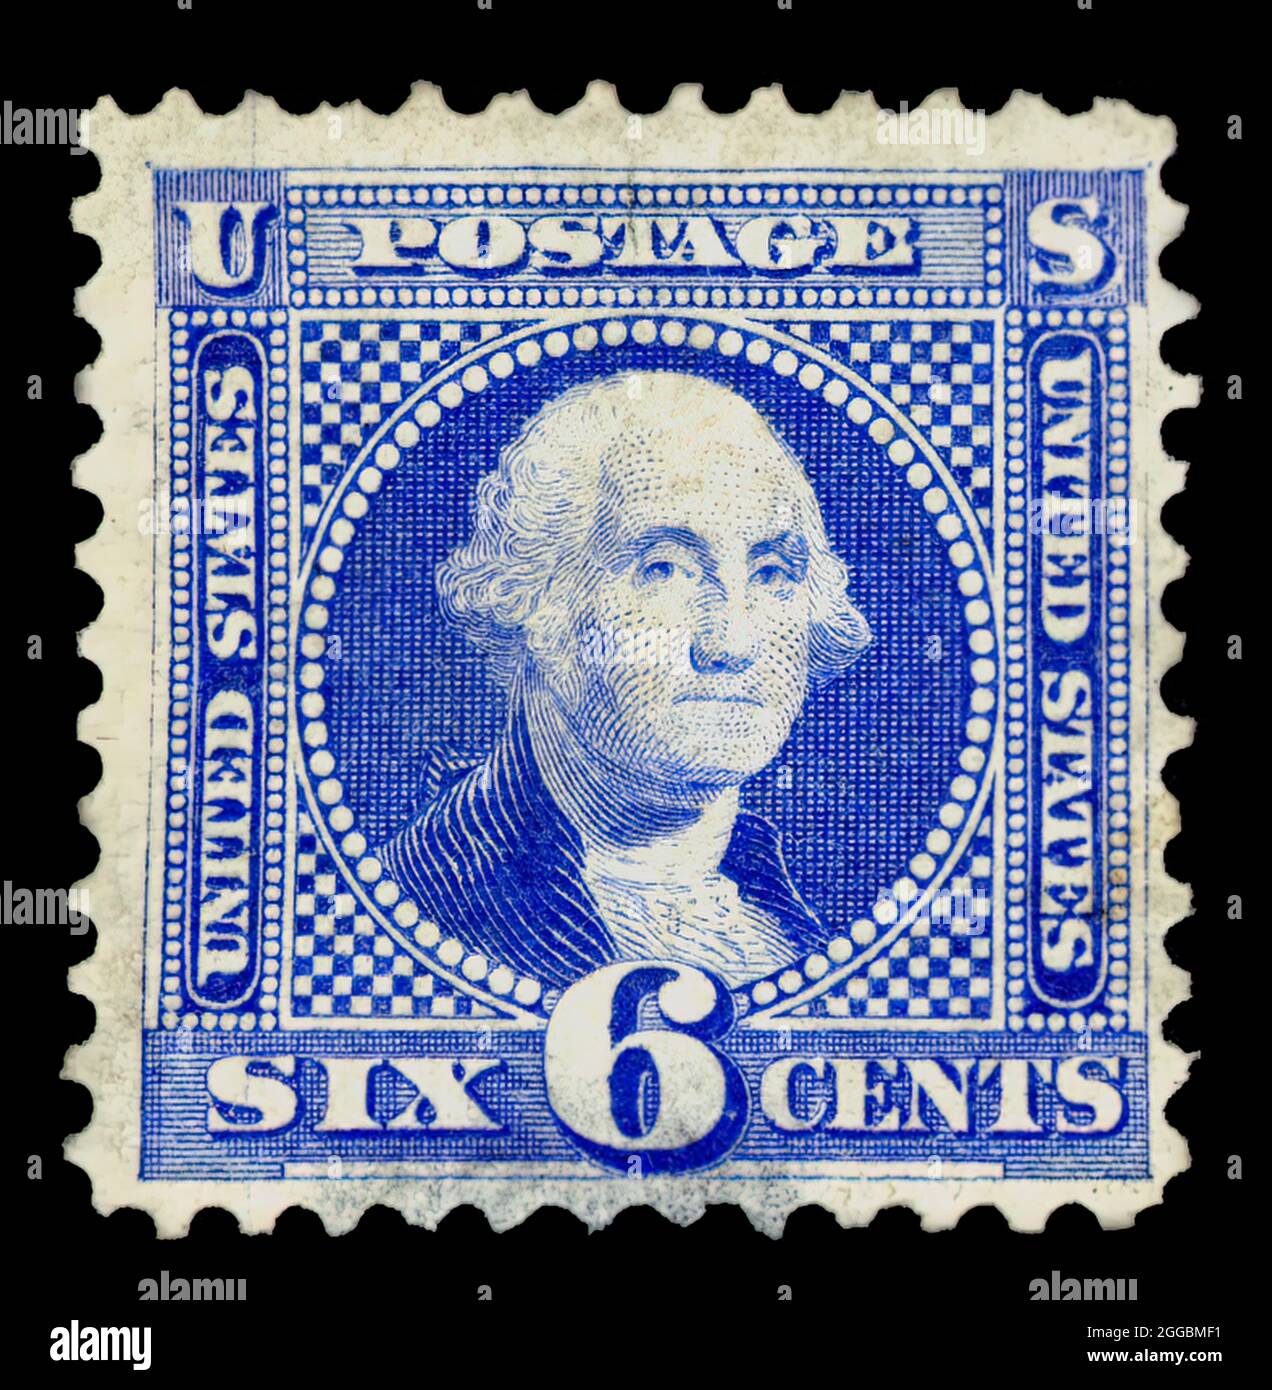 6c Washington re-issue single, 1875. Unused; perf 12; re-issue of 1869; without grill;In 1875, Post Office Department officials decided to exhibit samples of all previously issued stamps at the Centennial Exposition in Philadelphia the following year. Since this required a special printing, the department ordered extra copies for sale to stamp collectors. Stock Photo